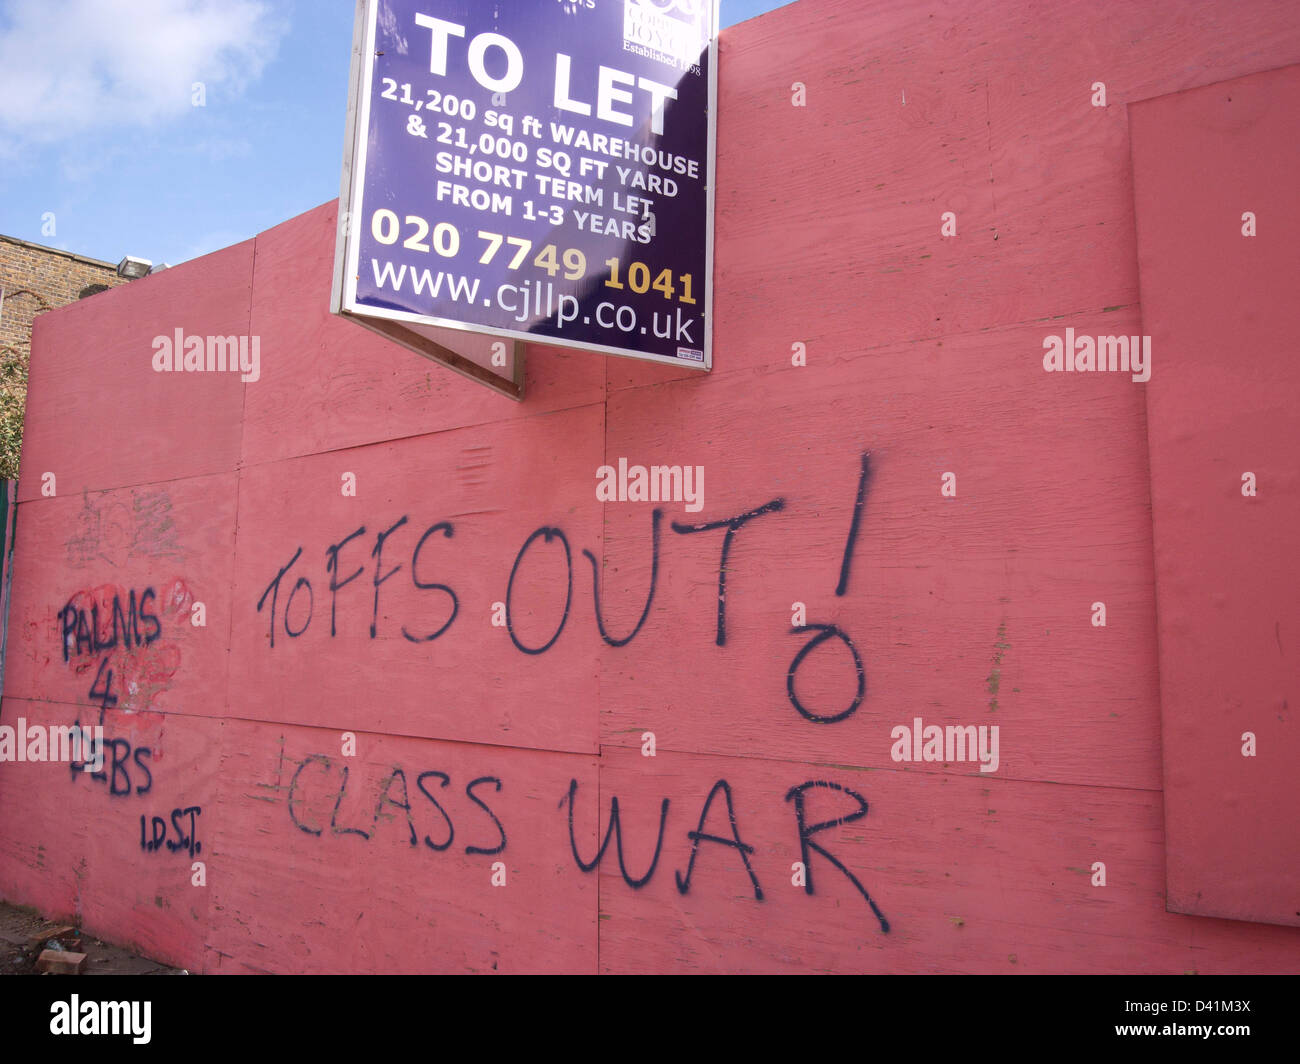 Class war graffiti says TOFFS OUT! in a comment against rich development in a poor area of London, UK. Stock Photo